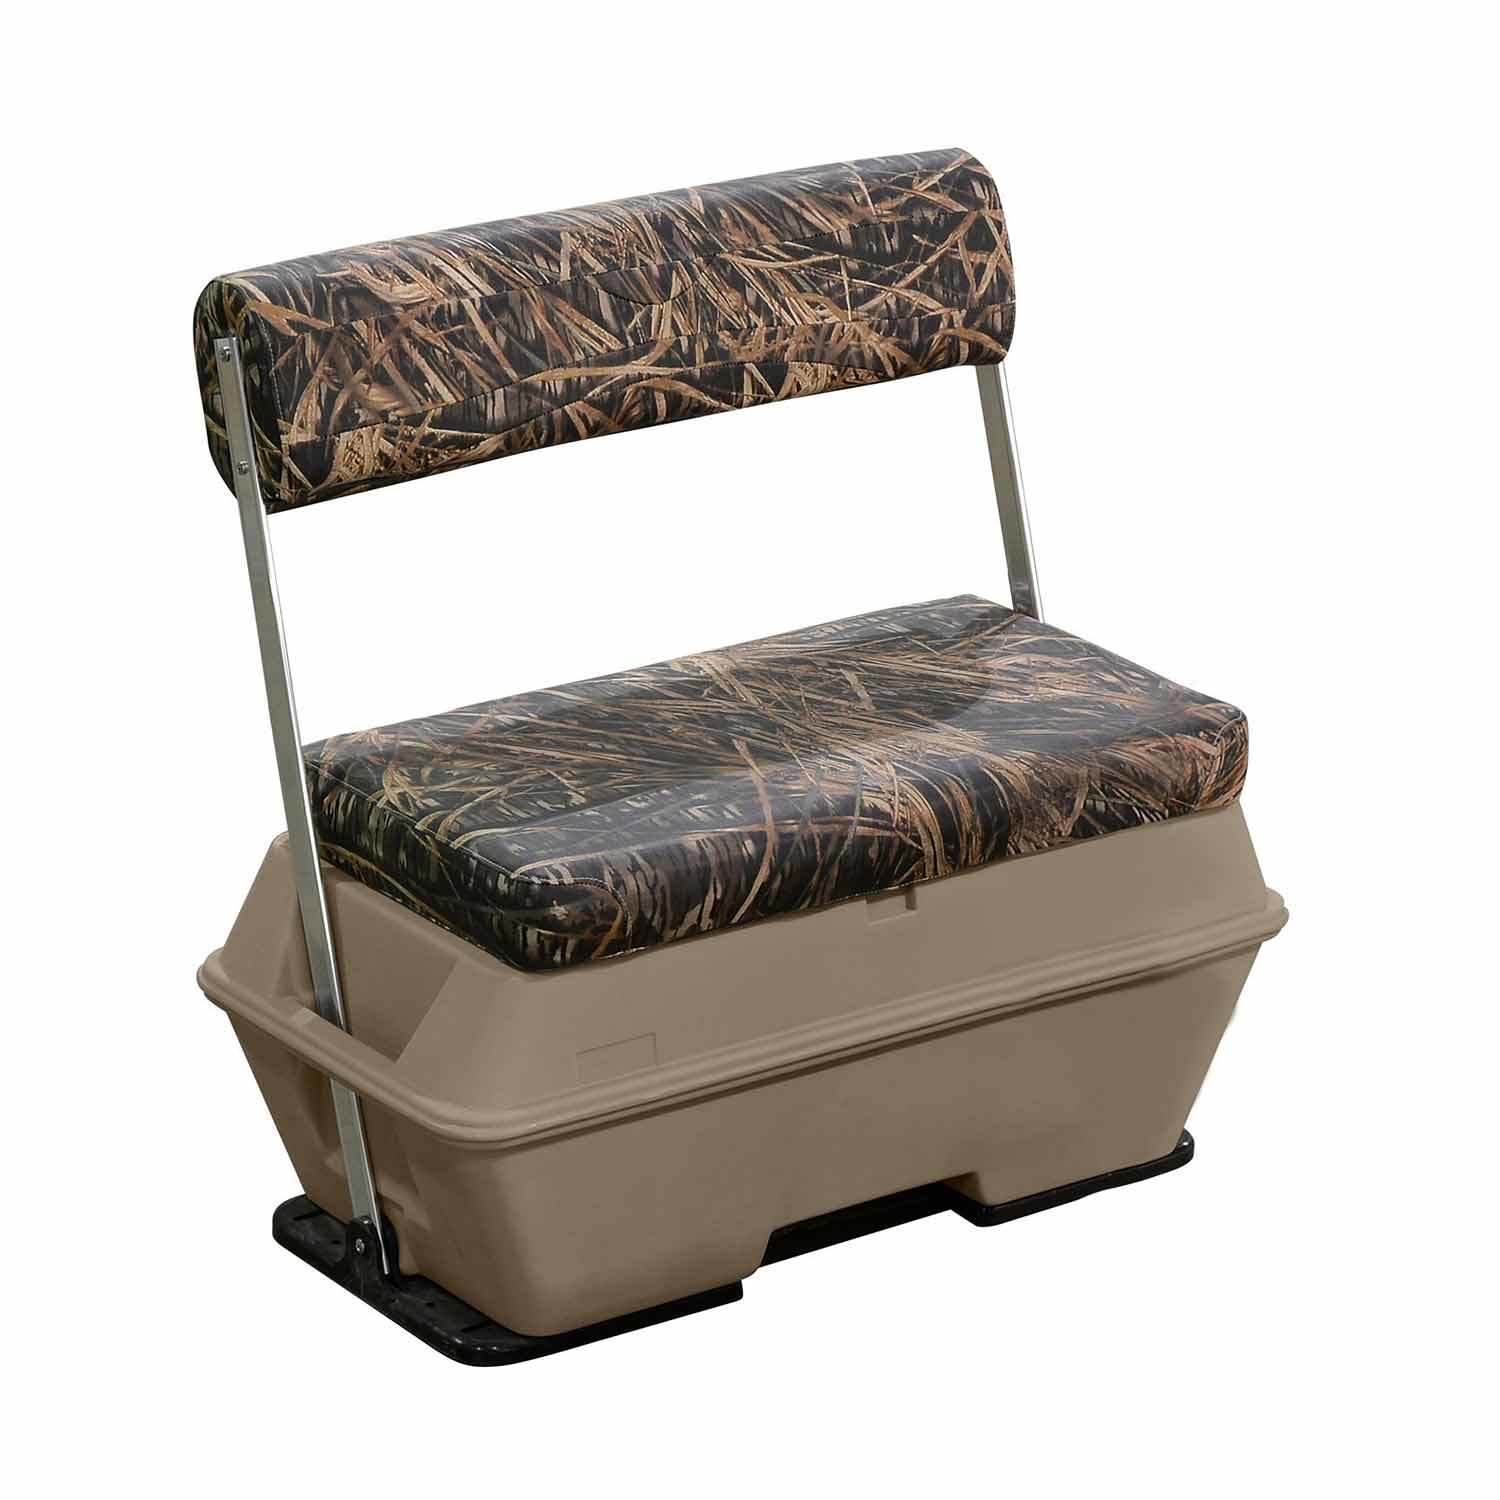 WISE SEATING Scout Series 70 Quart Swingback Camo Pontoon Cooler